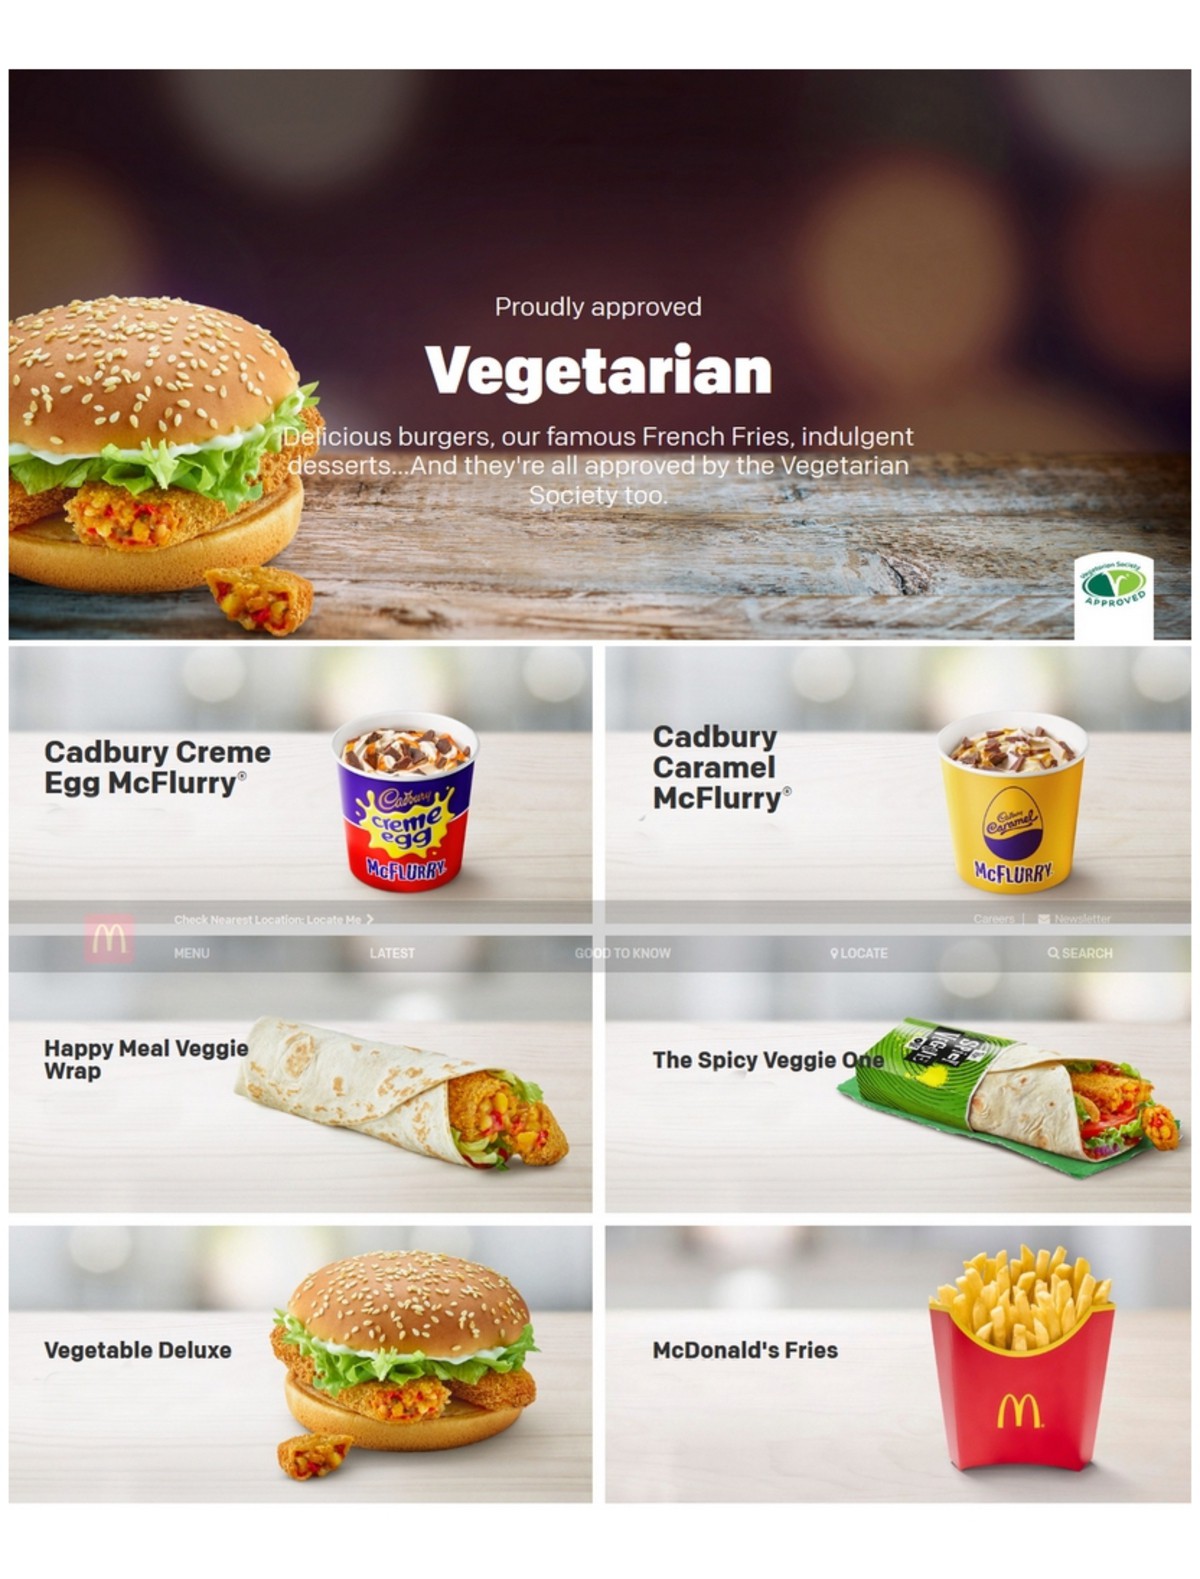 McDonald's Vegetarian Offers from 1 April